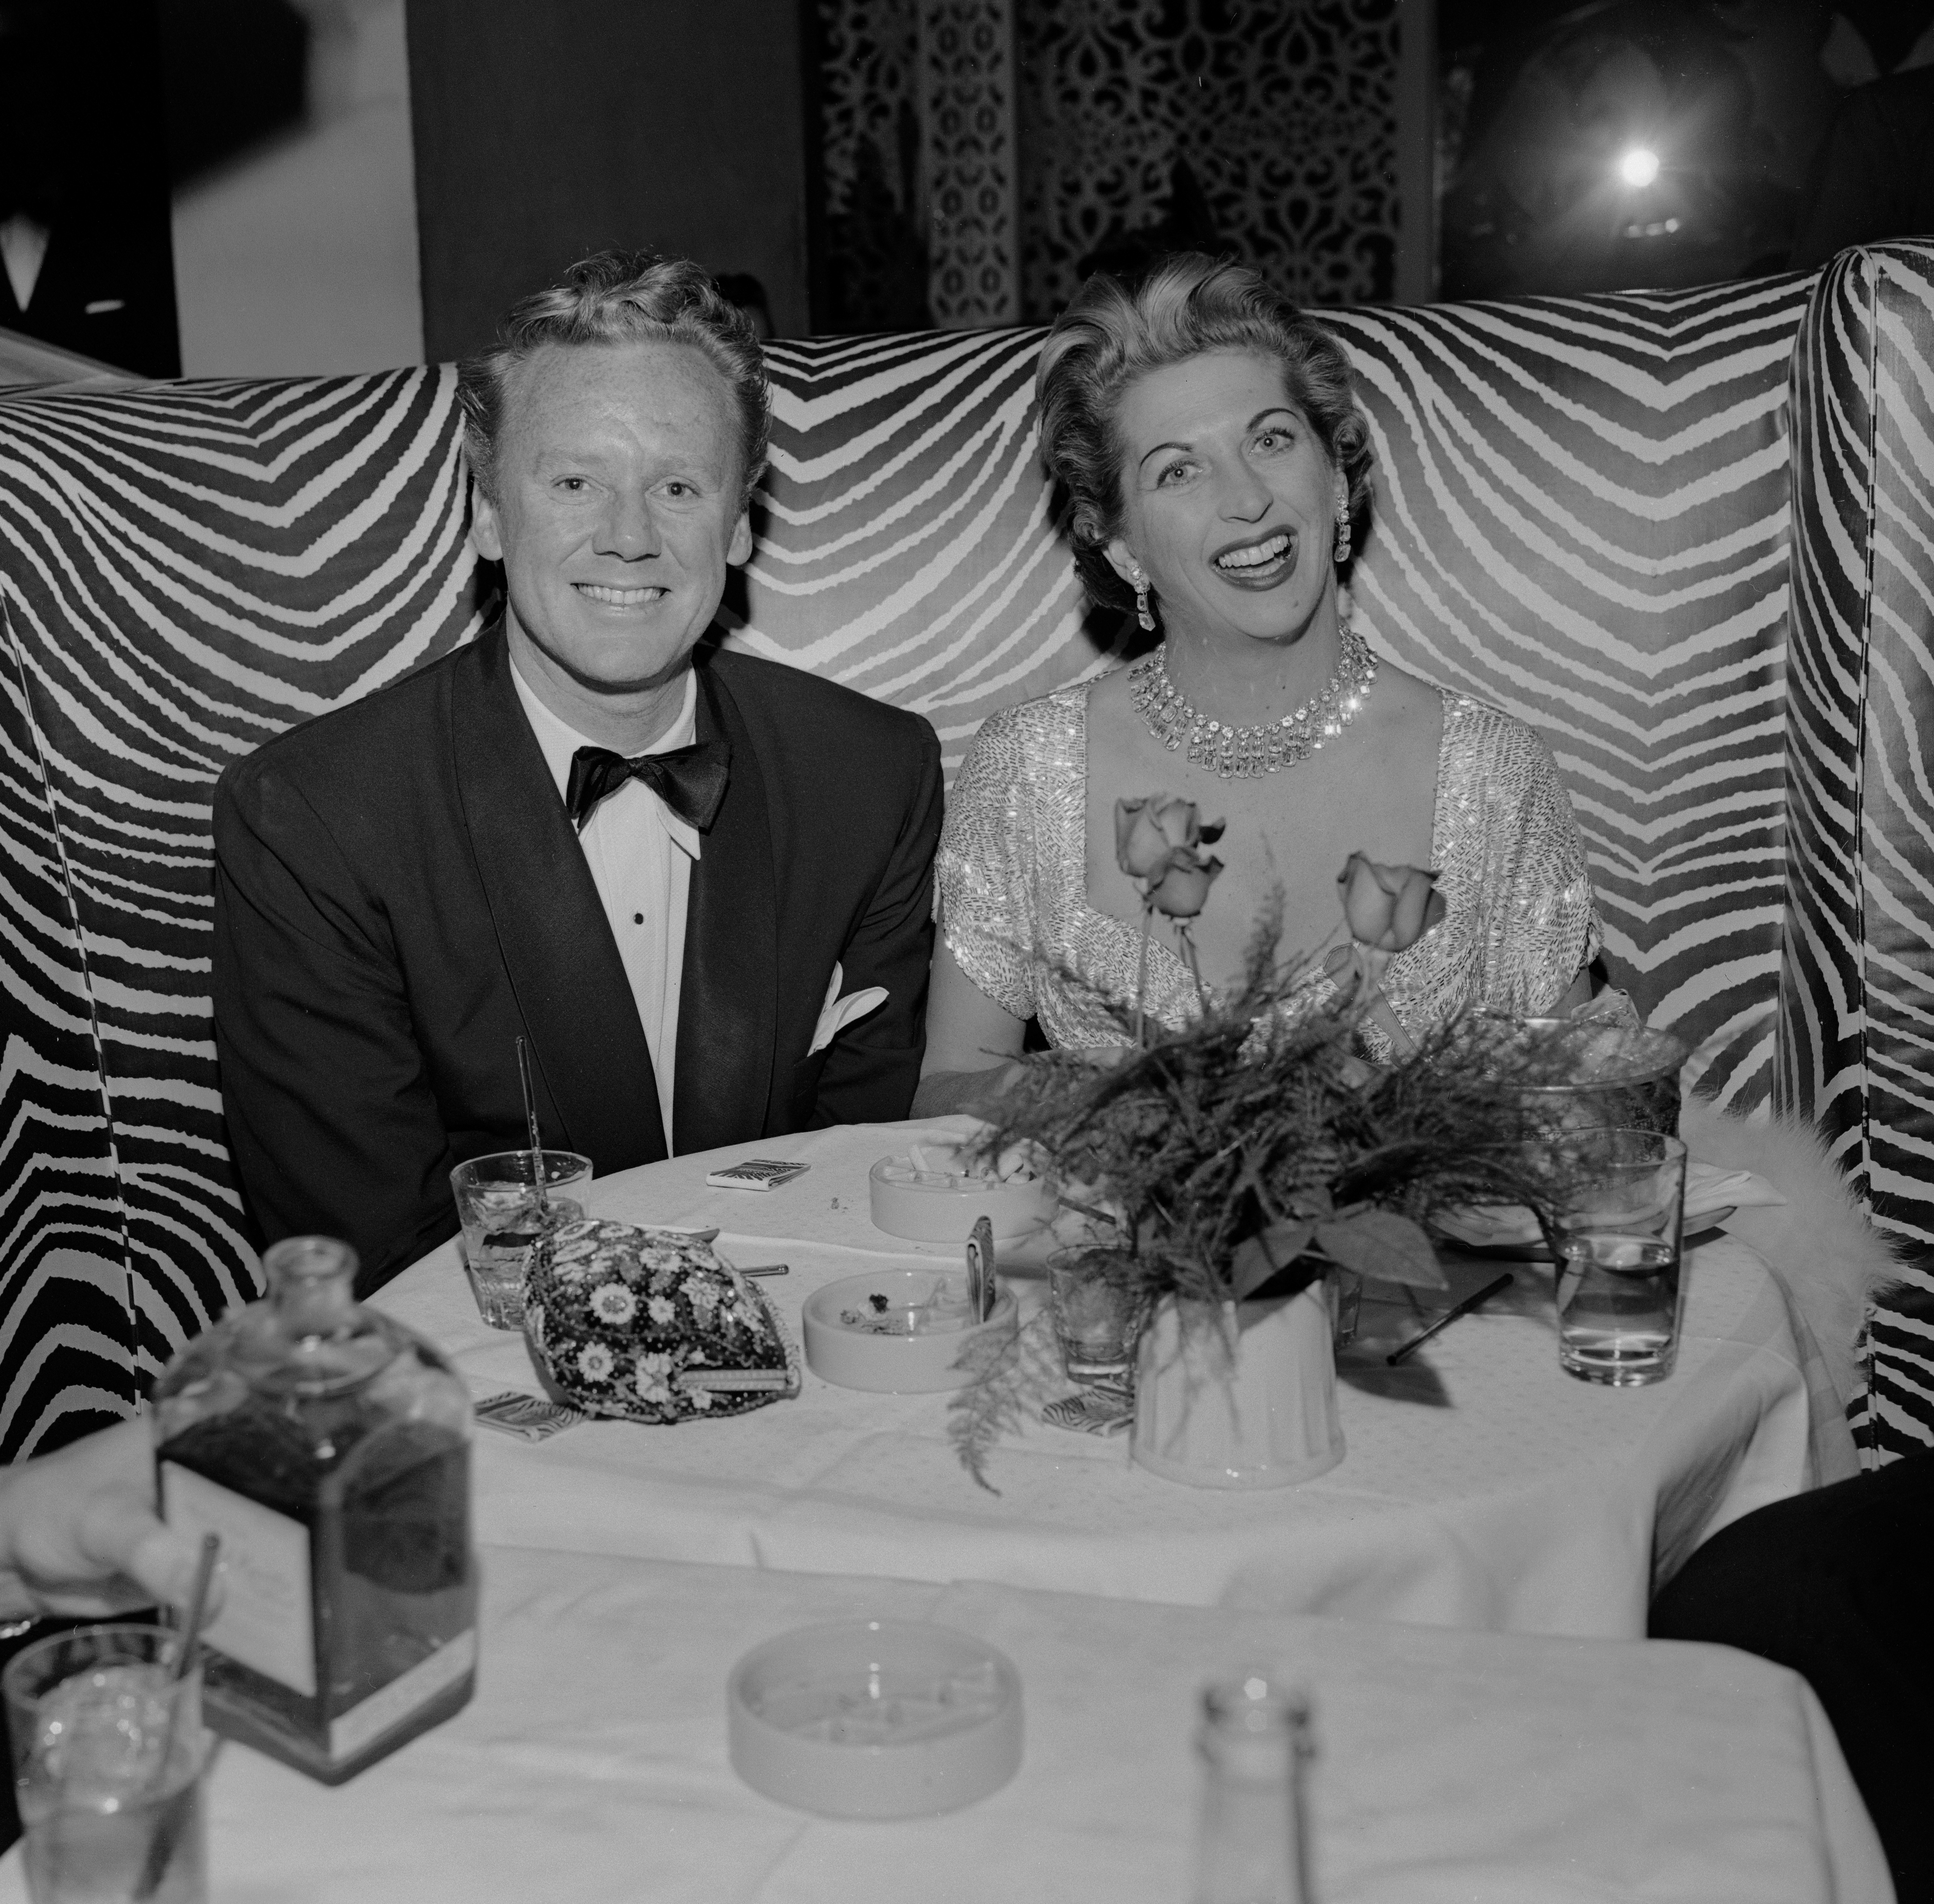 Van Johnson and his wife, Evie, at New York's El Morocco nightclub on November 18, 1954 | Source: Getty Images